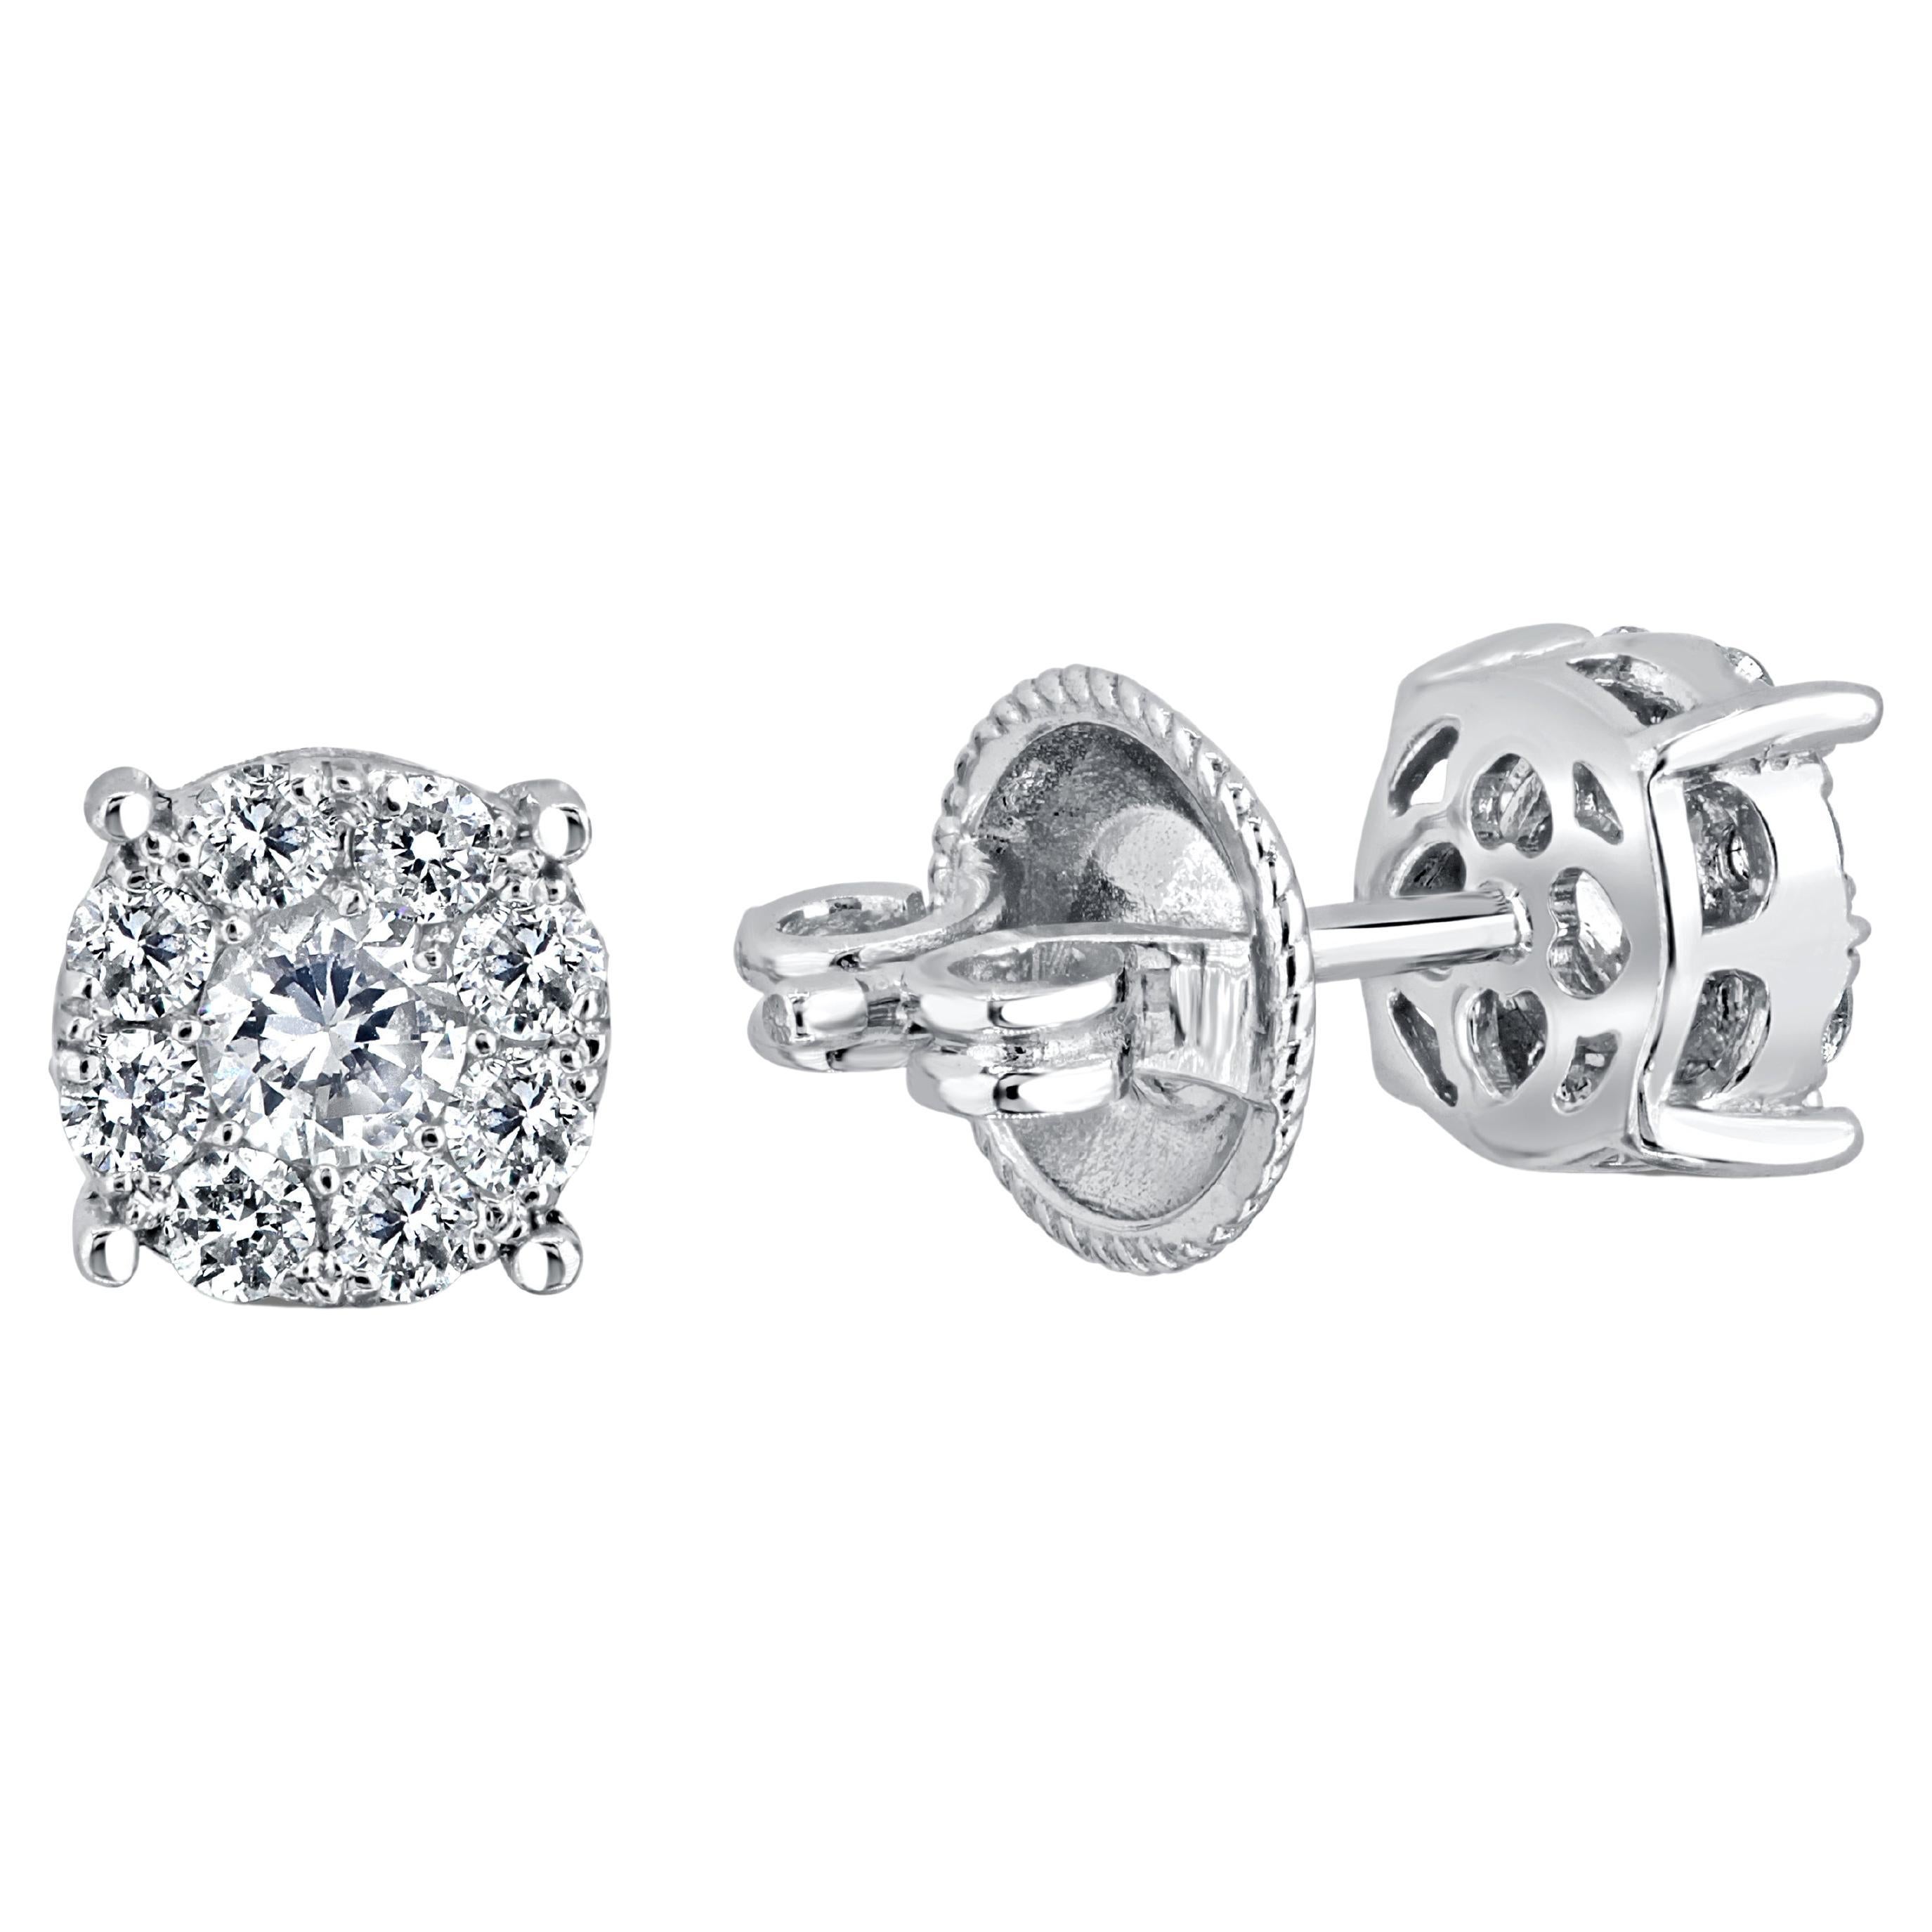 Indulge in the allure of these exquisite earrings, meticulously designed to create an illusion of a single, magnificent round diamond at the center. The clever arrangement of multiple closely-set round diamonds forms a breathtaking visual